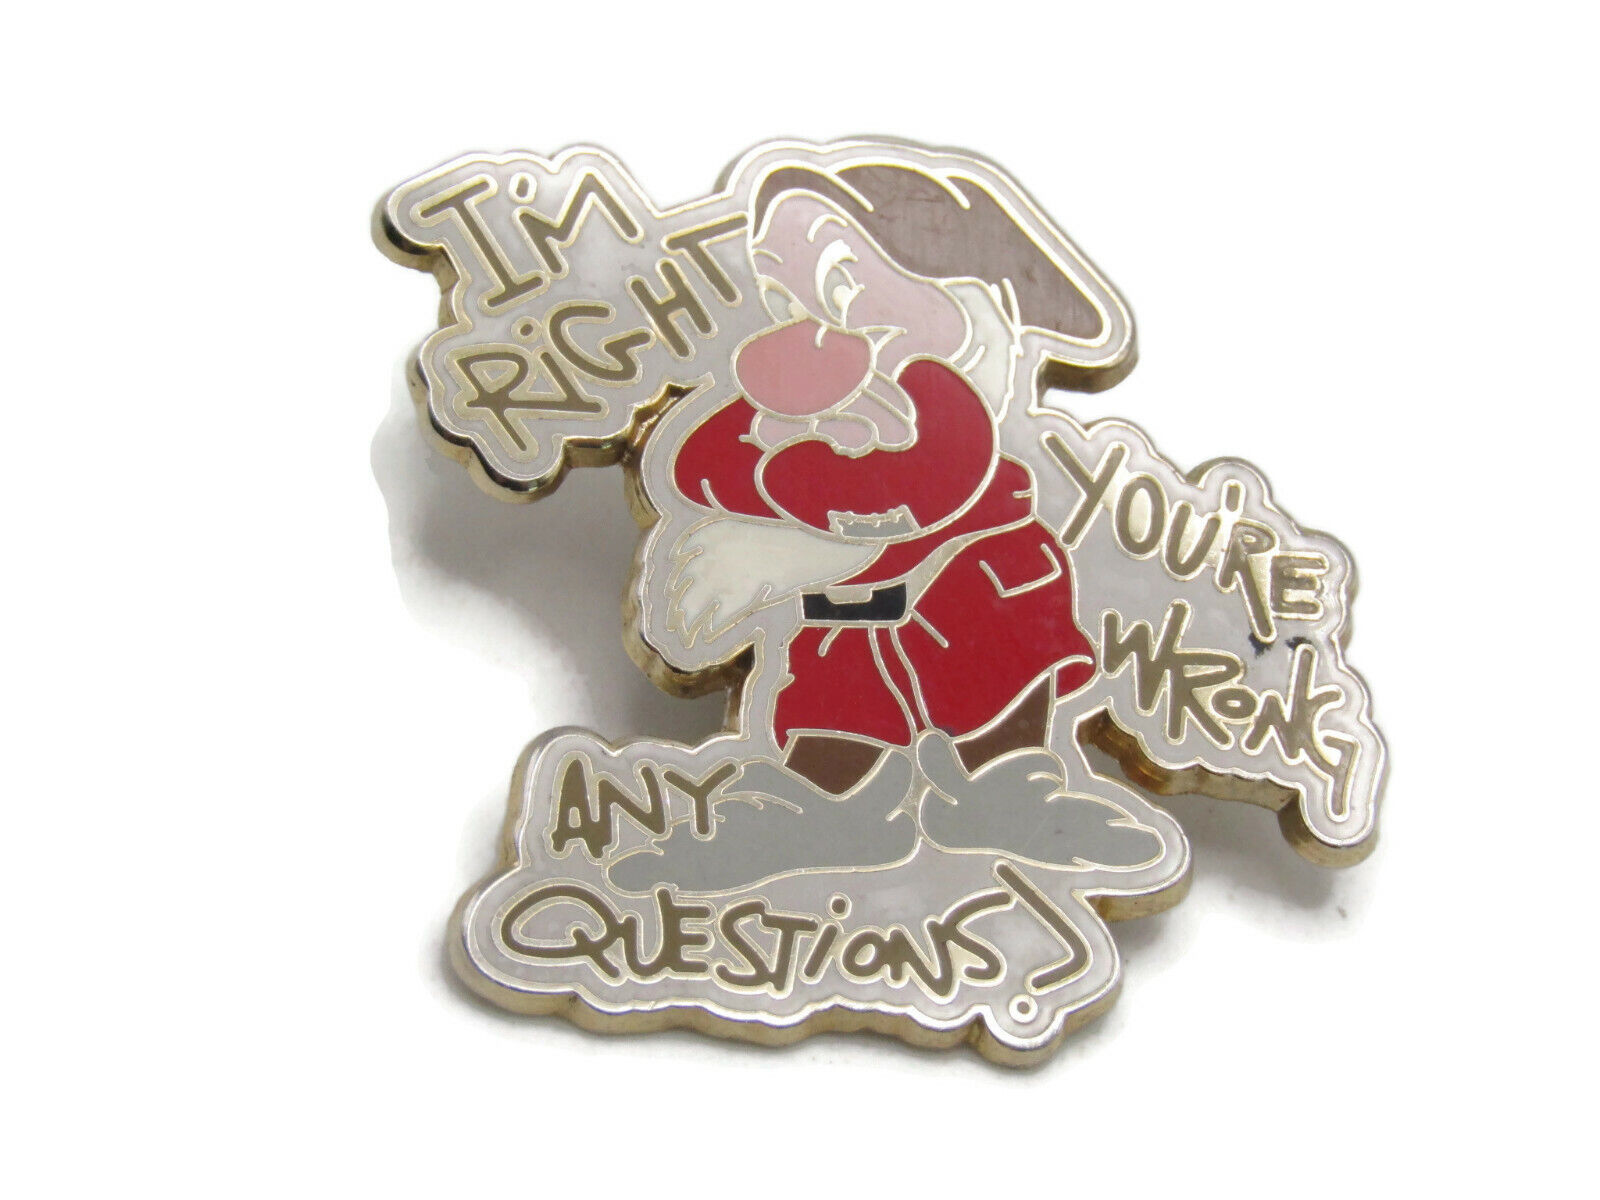 Grumpy Disney Character Pin I'm Right You're Wrong Any Questions?